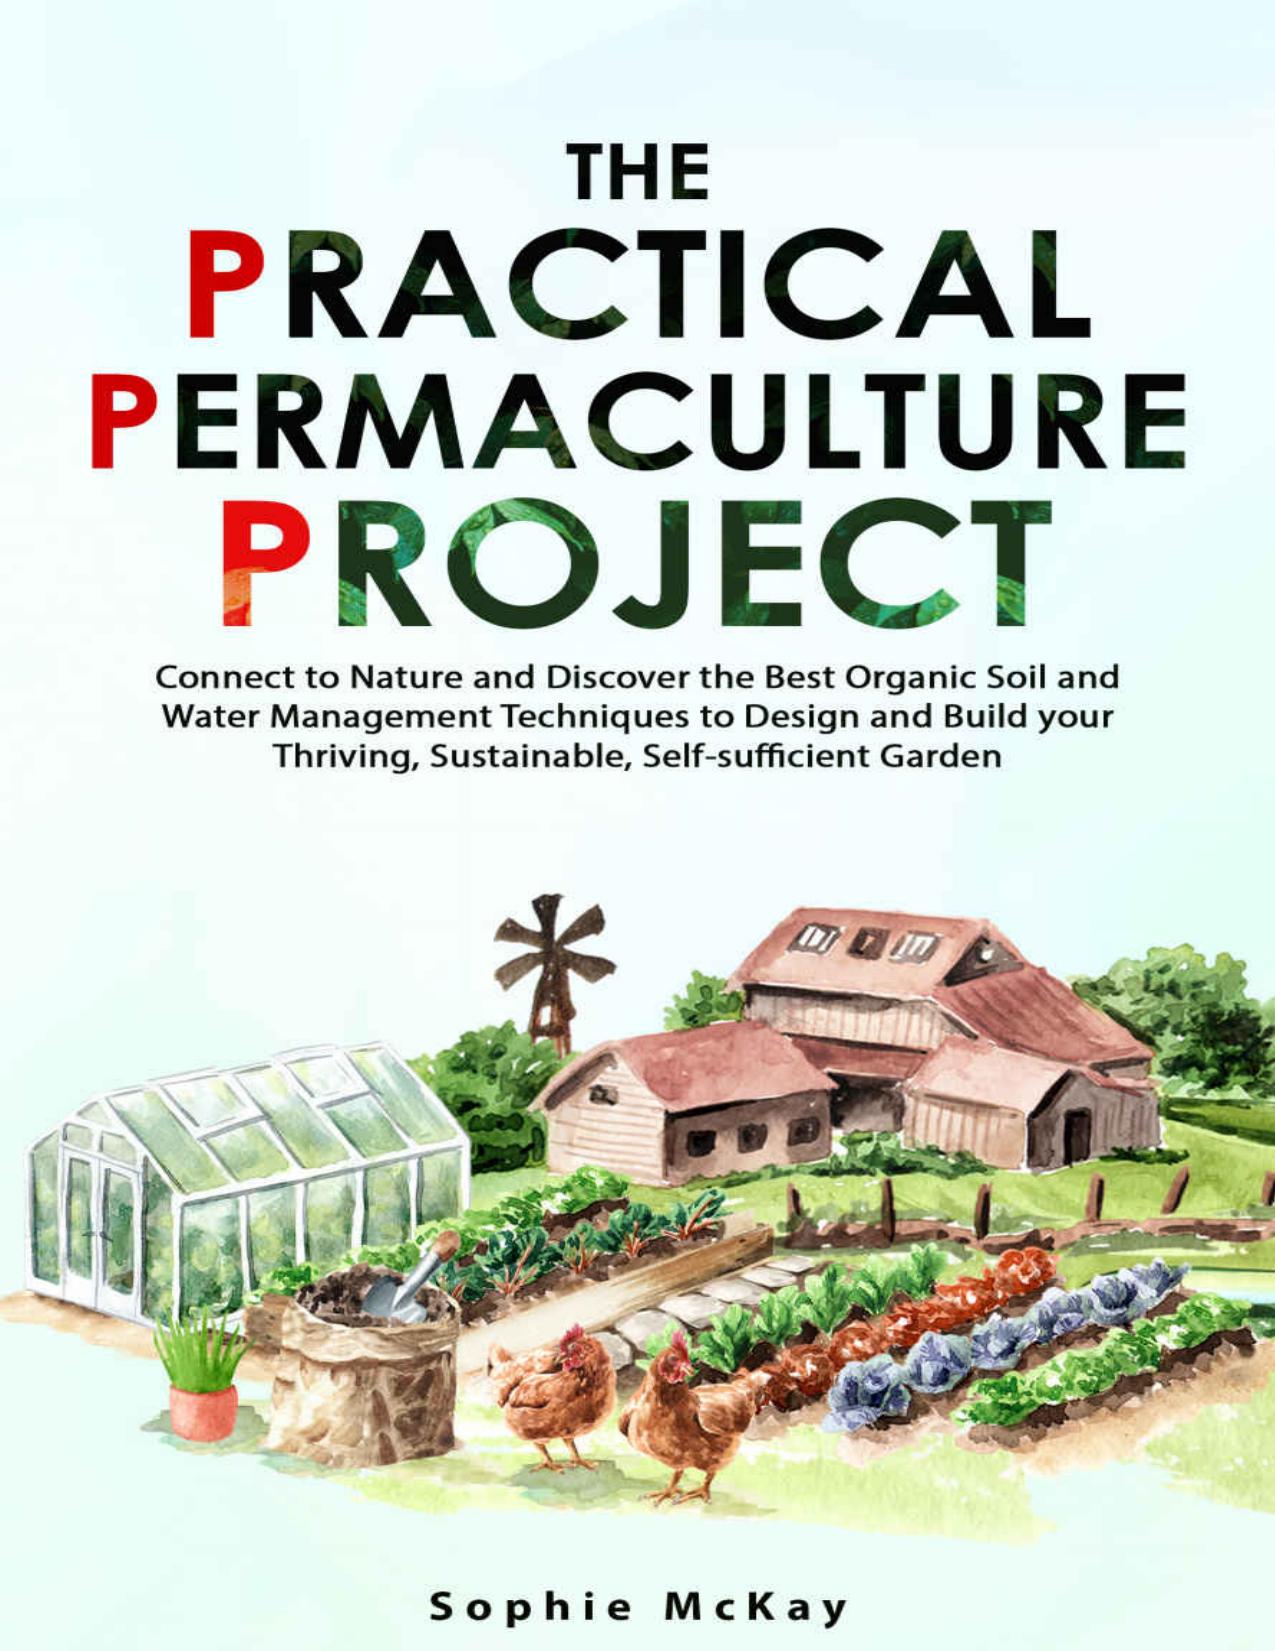 The Practical Permaculture Project: Connect to Nature and Discover the Best Organic Soil and Water Management Techniques to Design and Build Your Thriving, Sustainable, Self-Sufficient Garden by Sophie McKay